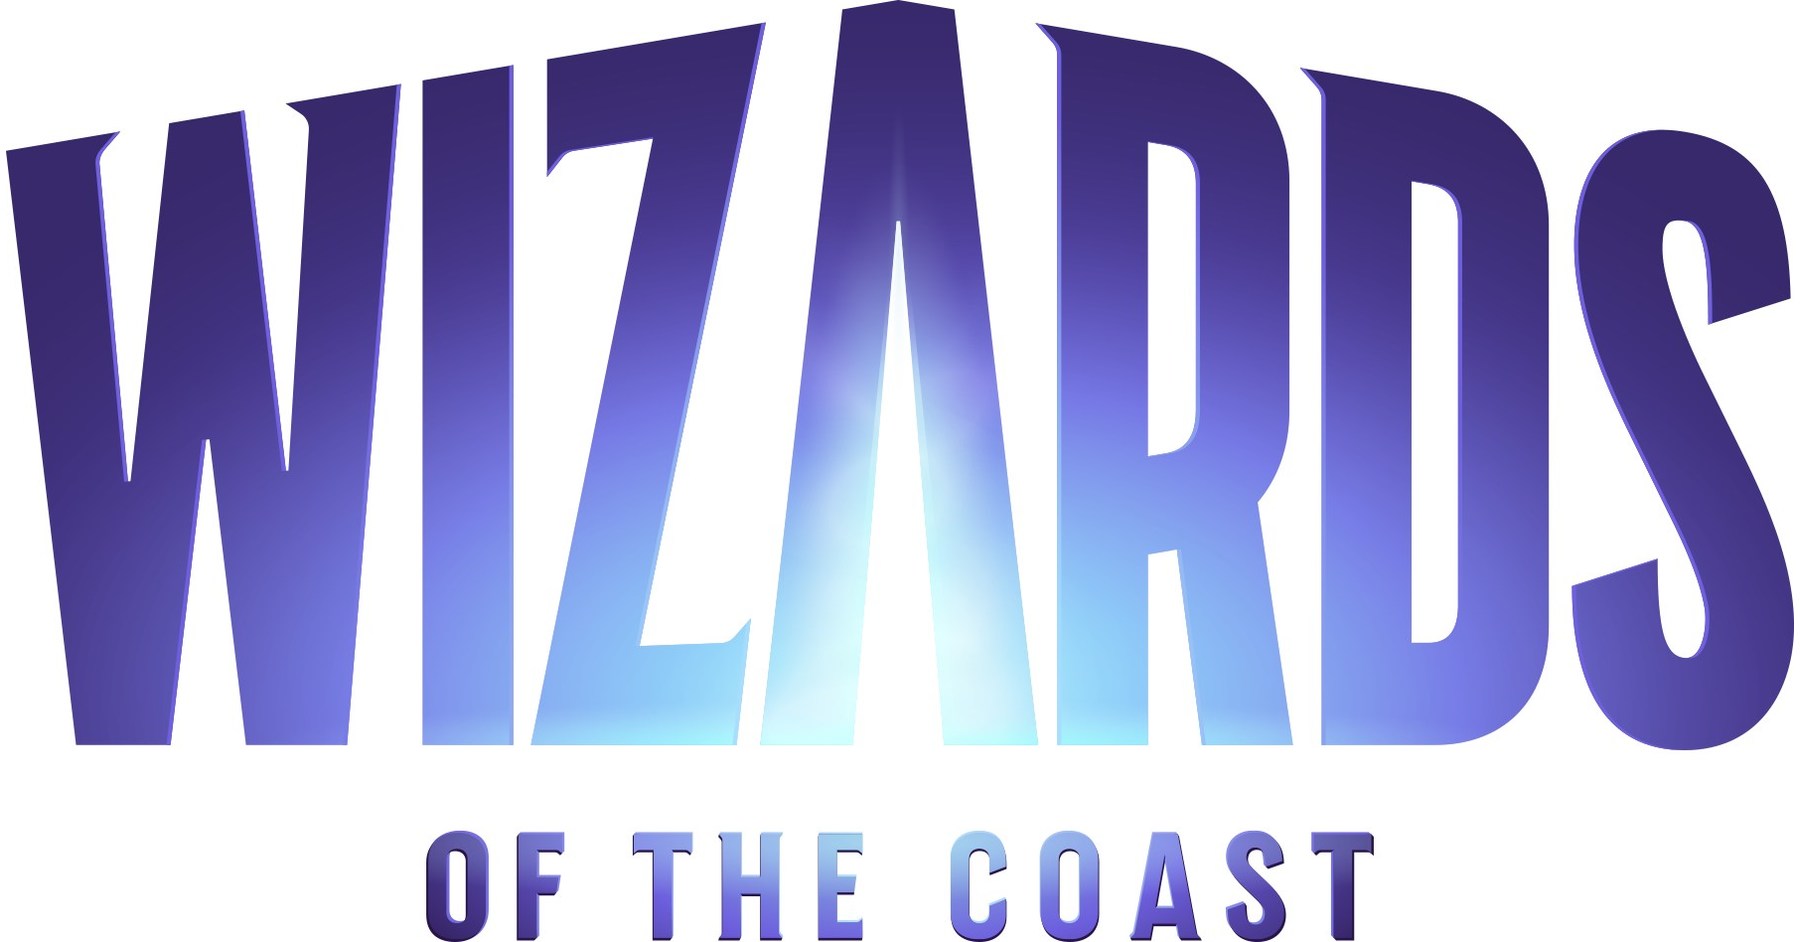 Wizards of the Coast Announces June 22 Launch Date for Dungeons